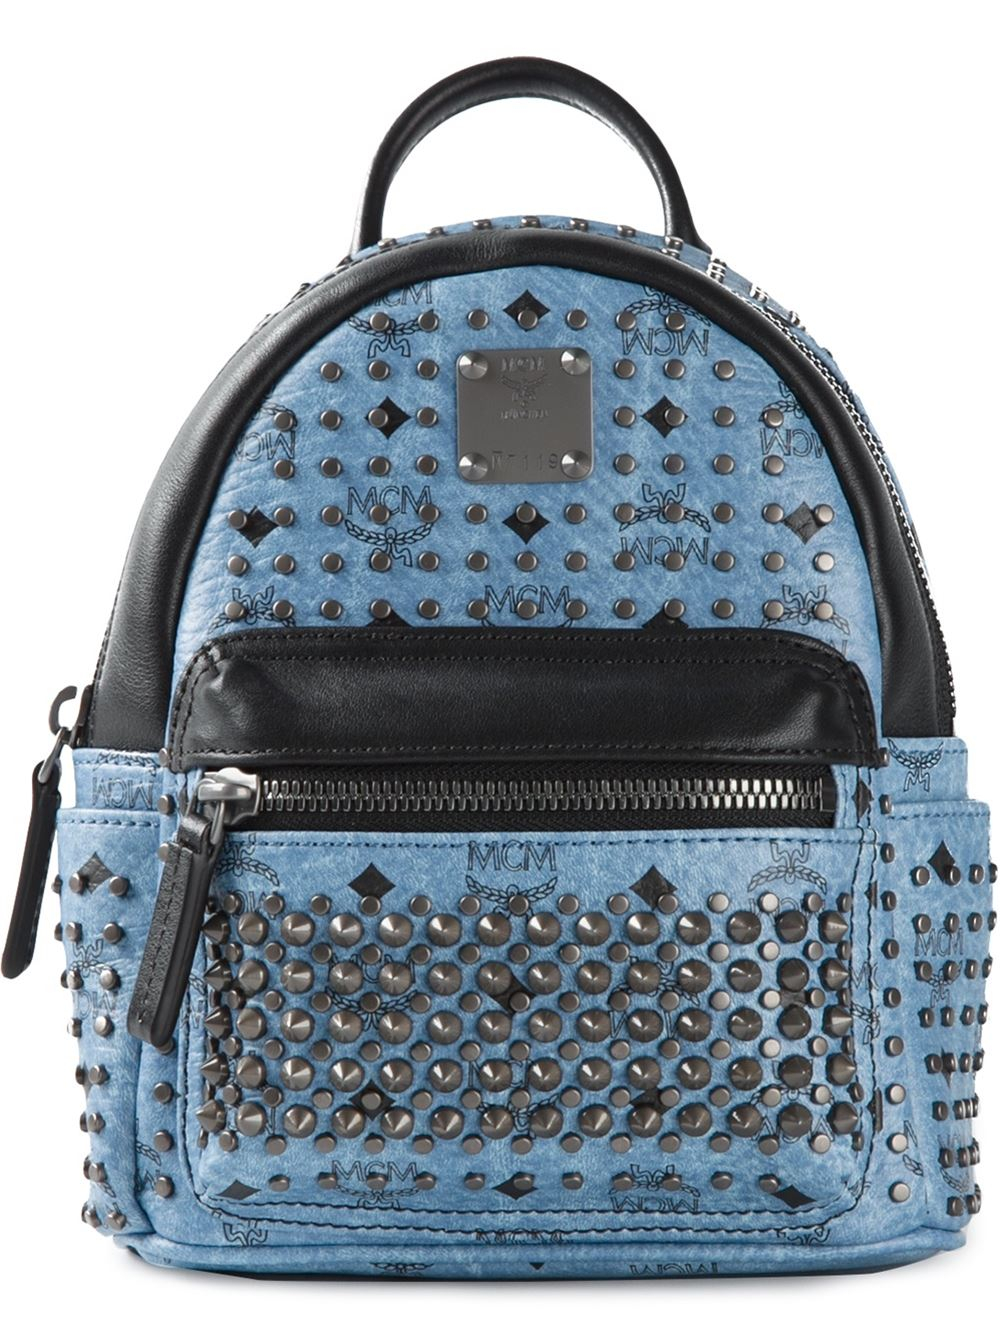 Mcm Studded Mini Backpack in Blue | Lyst